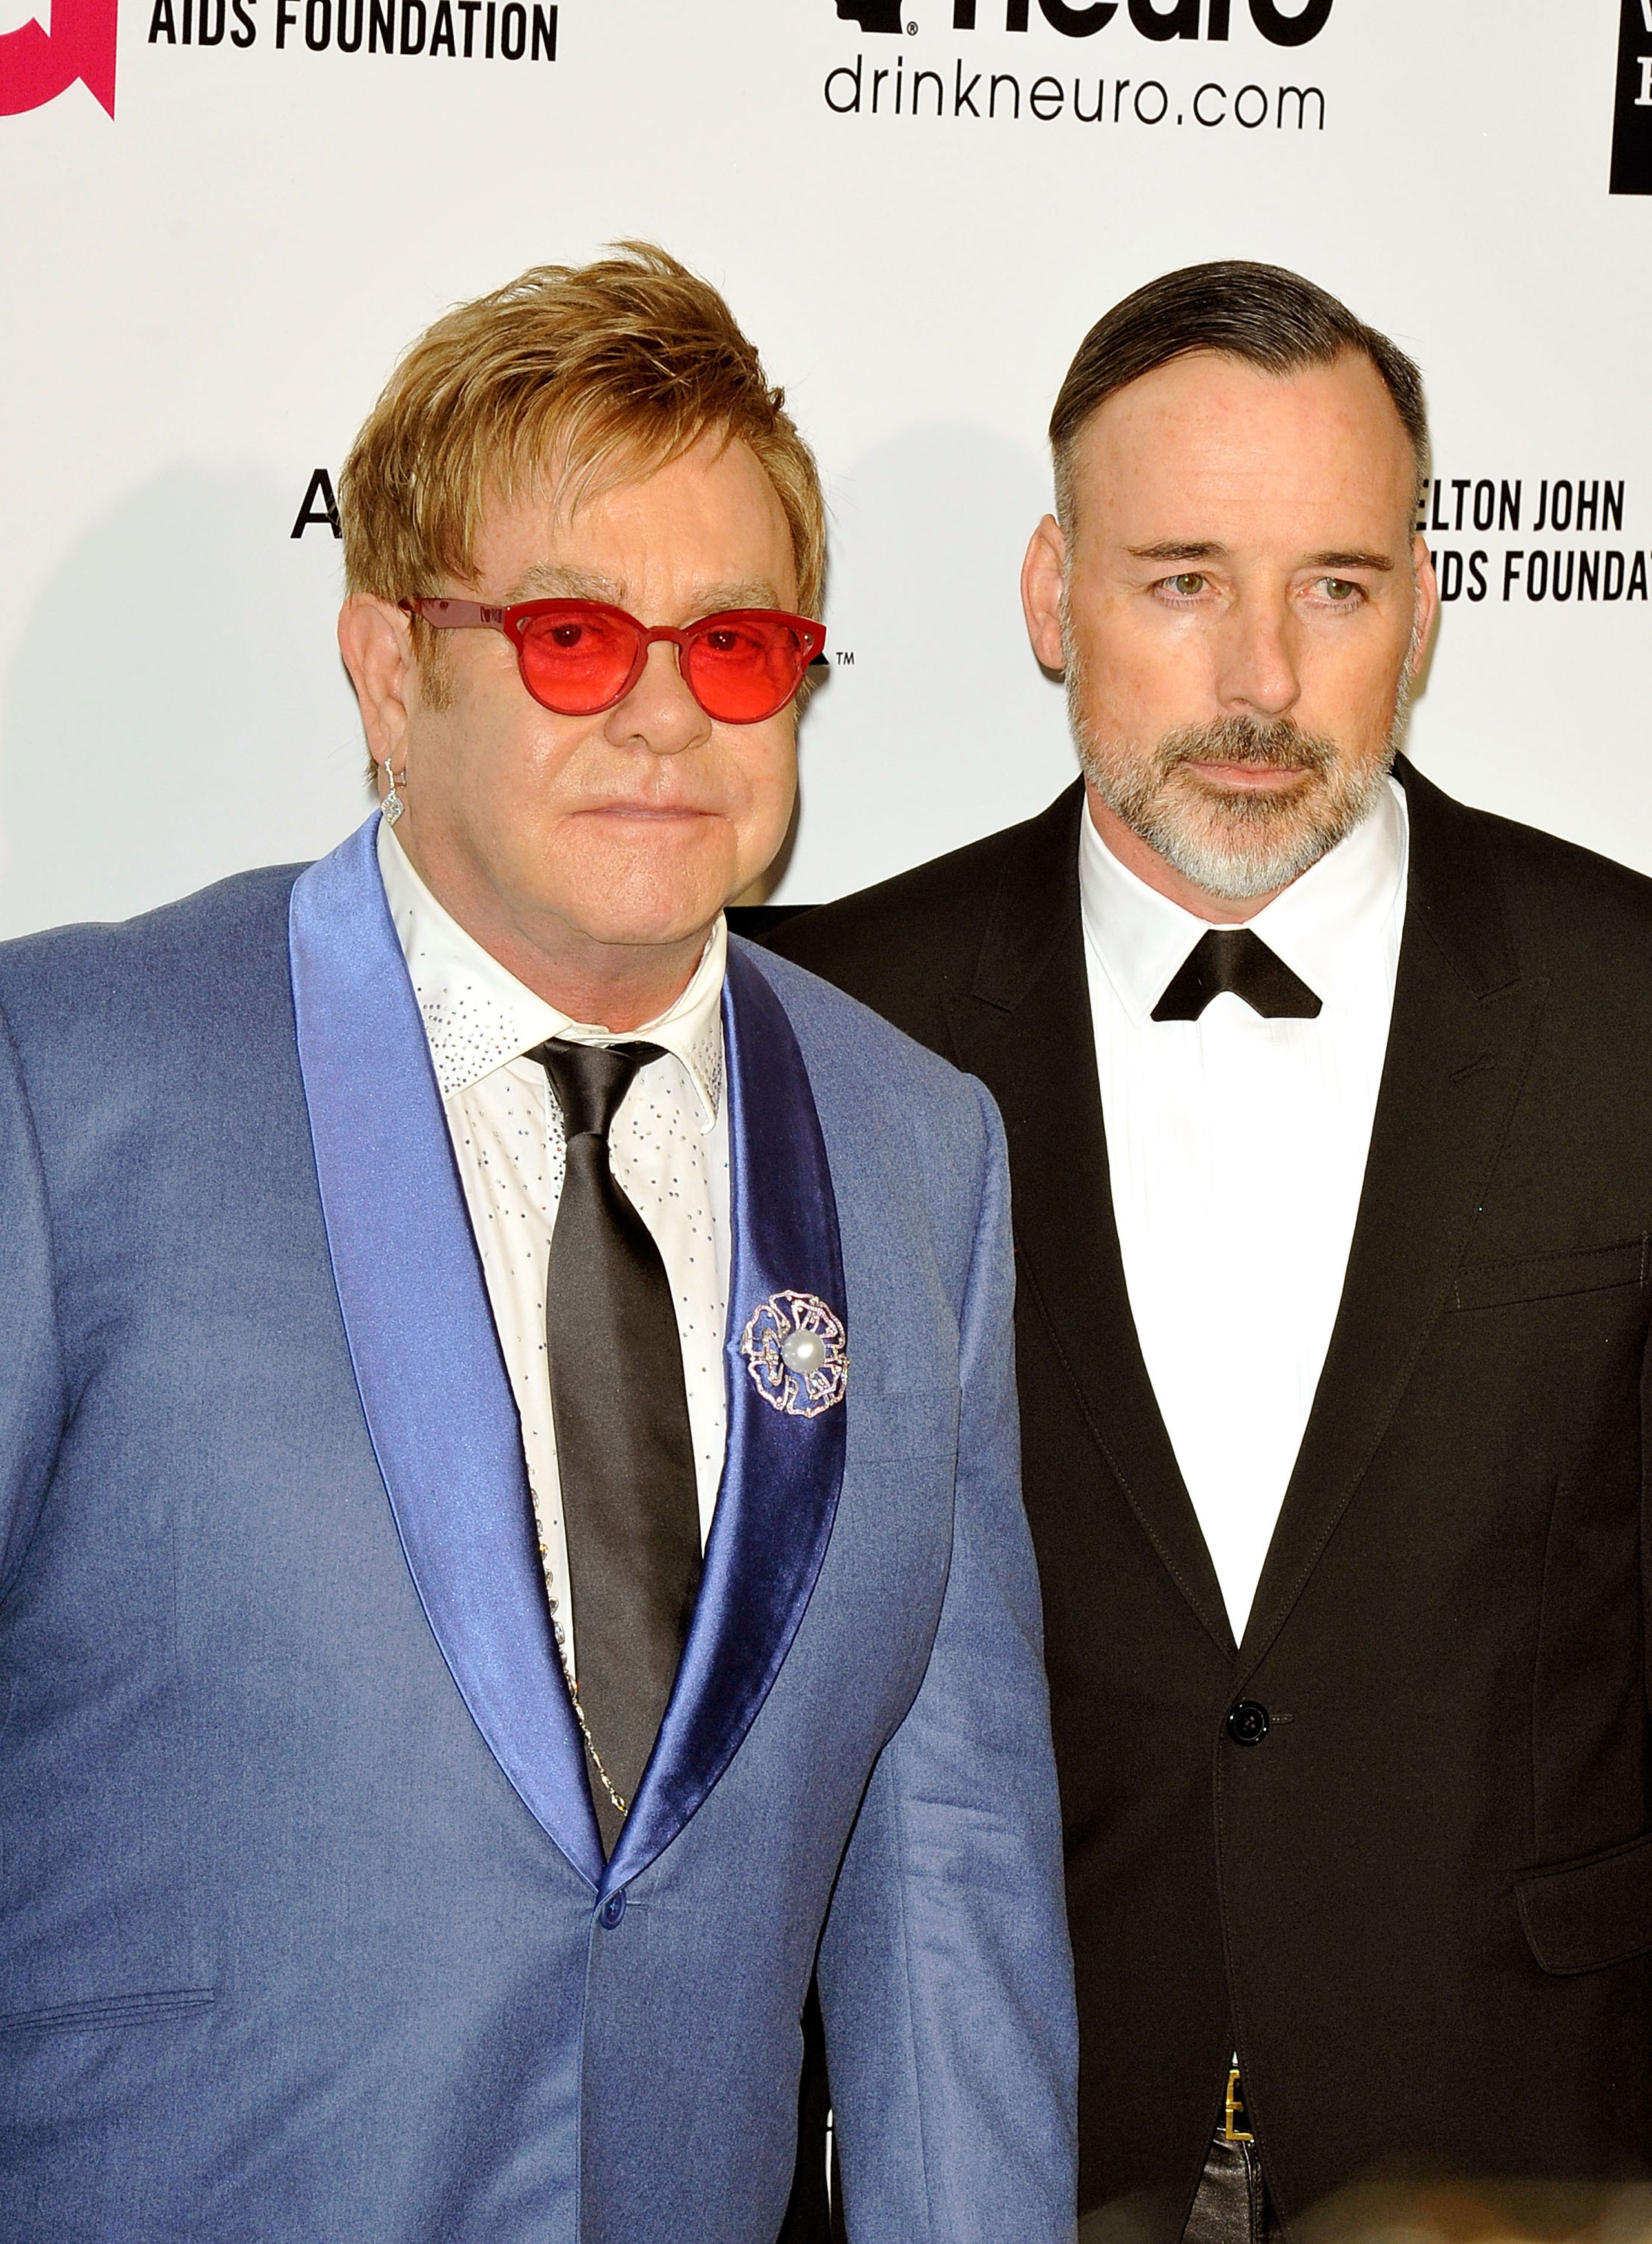 Elton John and David Furnish attend the 23rd Annual Elton John AIDS Foundation's Oscar Viewing Party on Feb. 22, 2015 in Los Angeles. (Michael Tullberg—Getty Images)